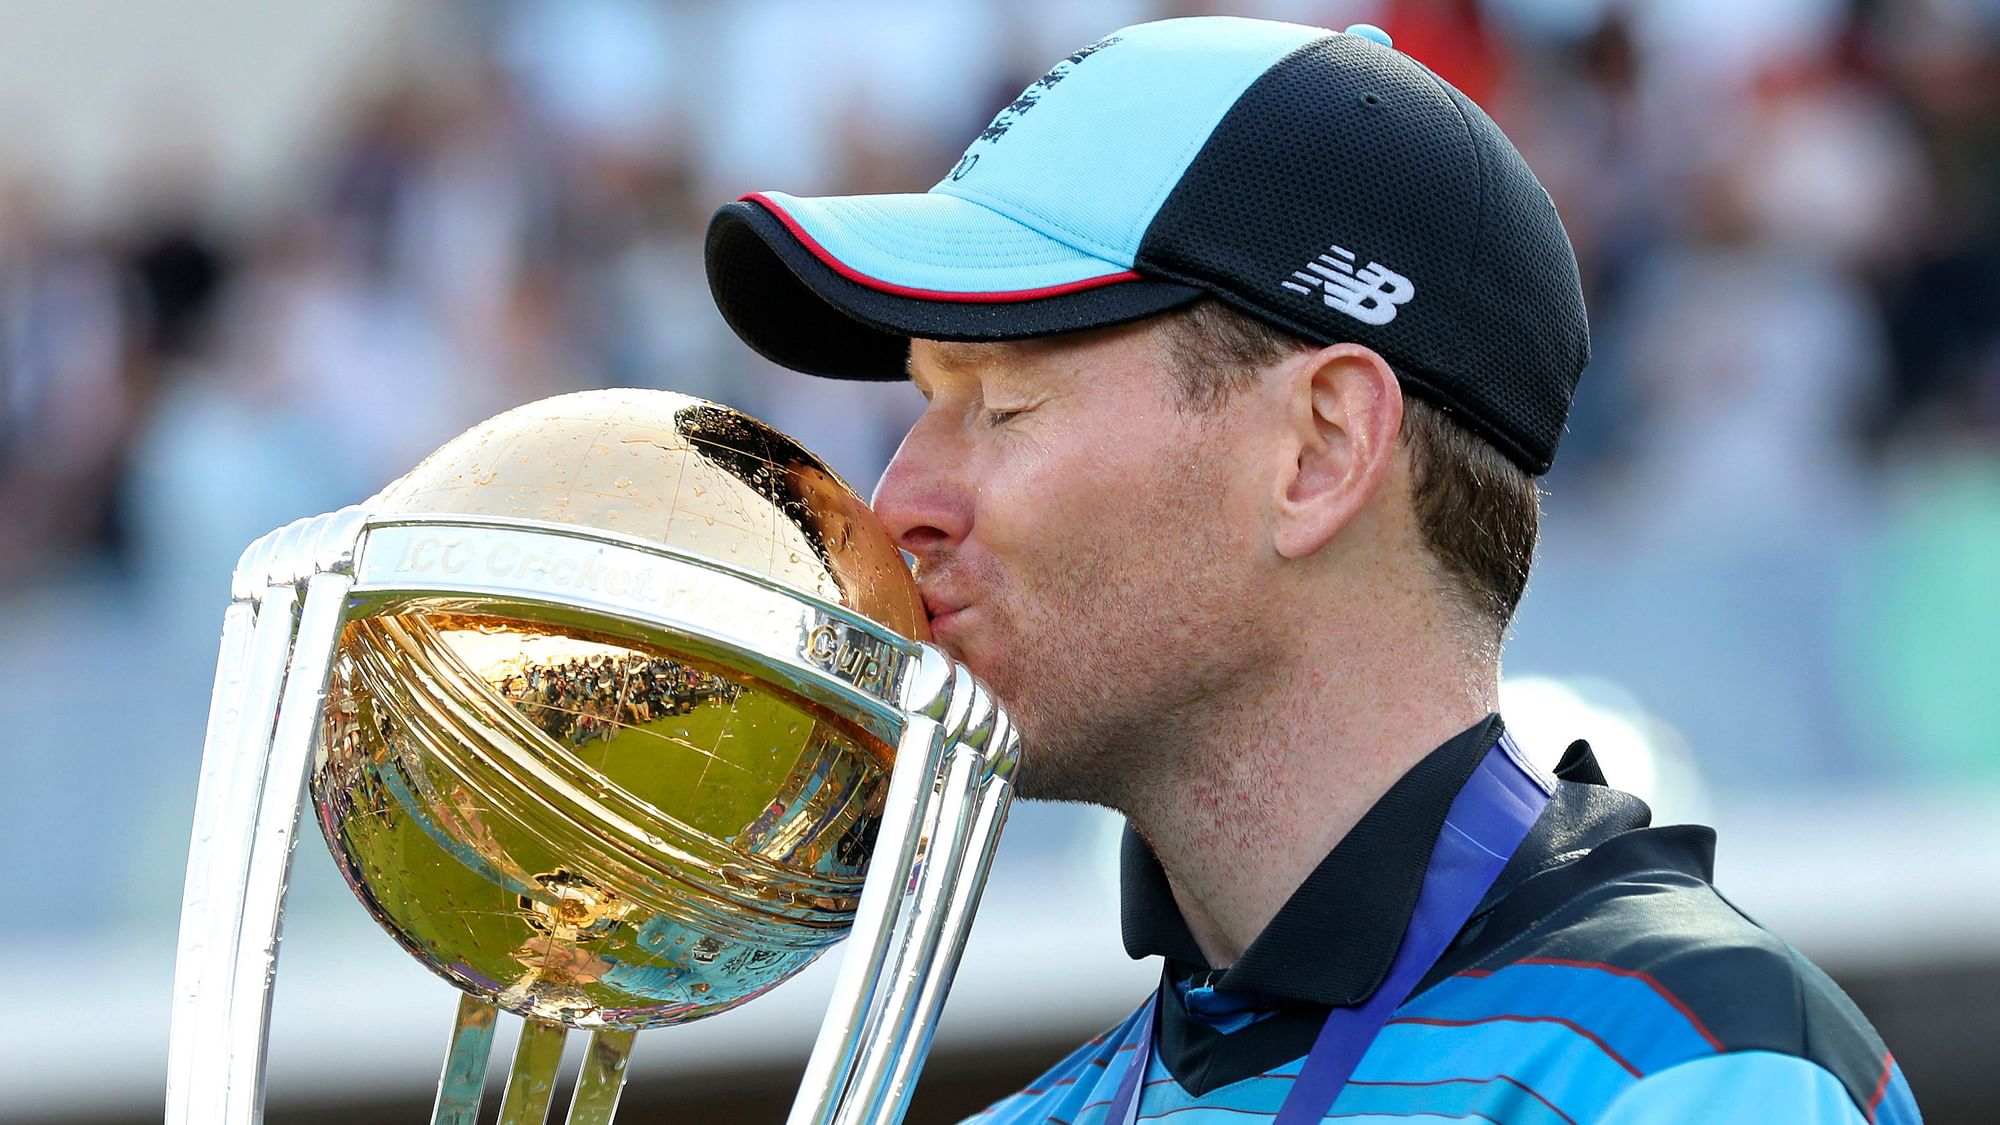 England won the ICC Cricket World Cup 2019 at Lord’s for the first time on 14 July 2019.